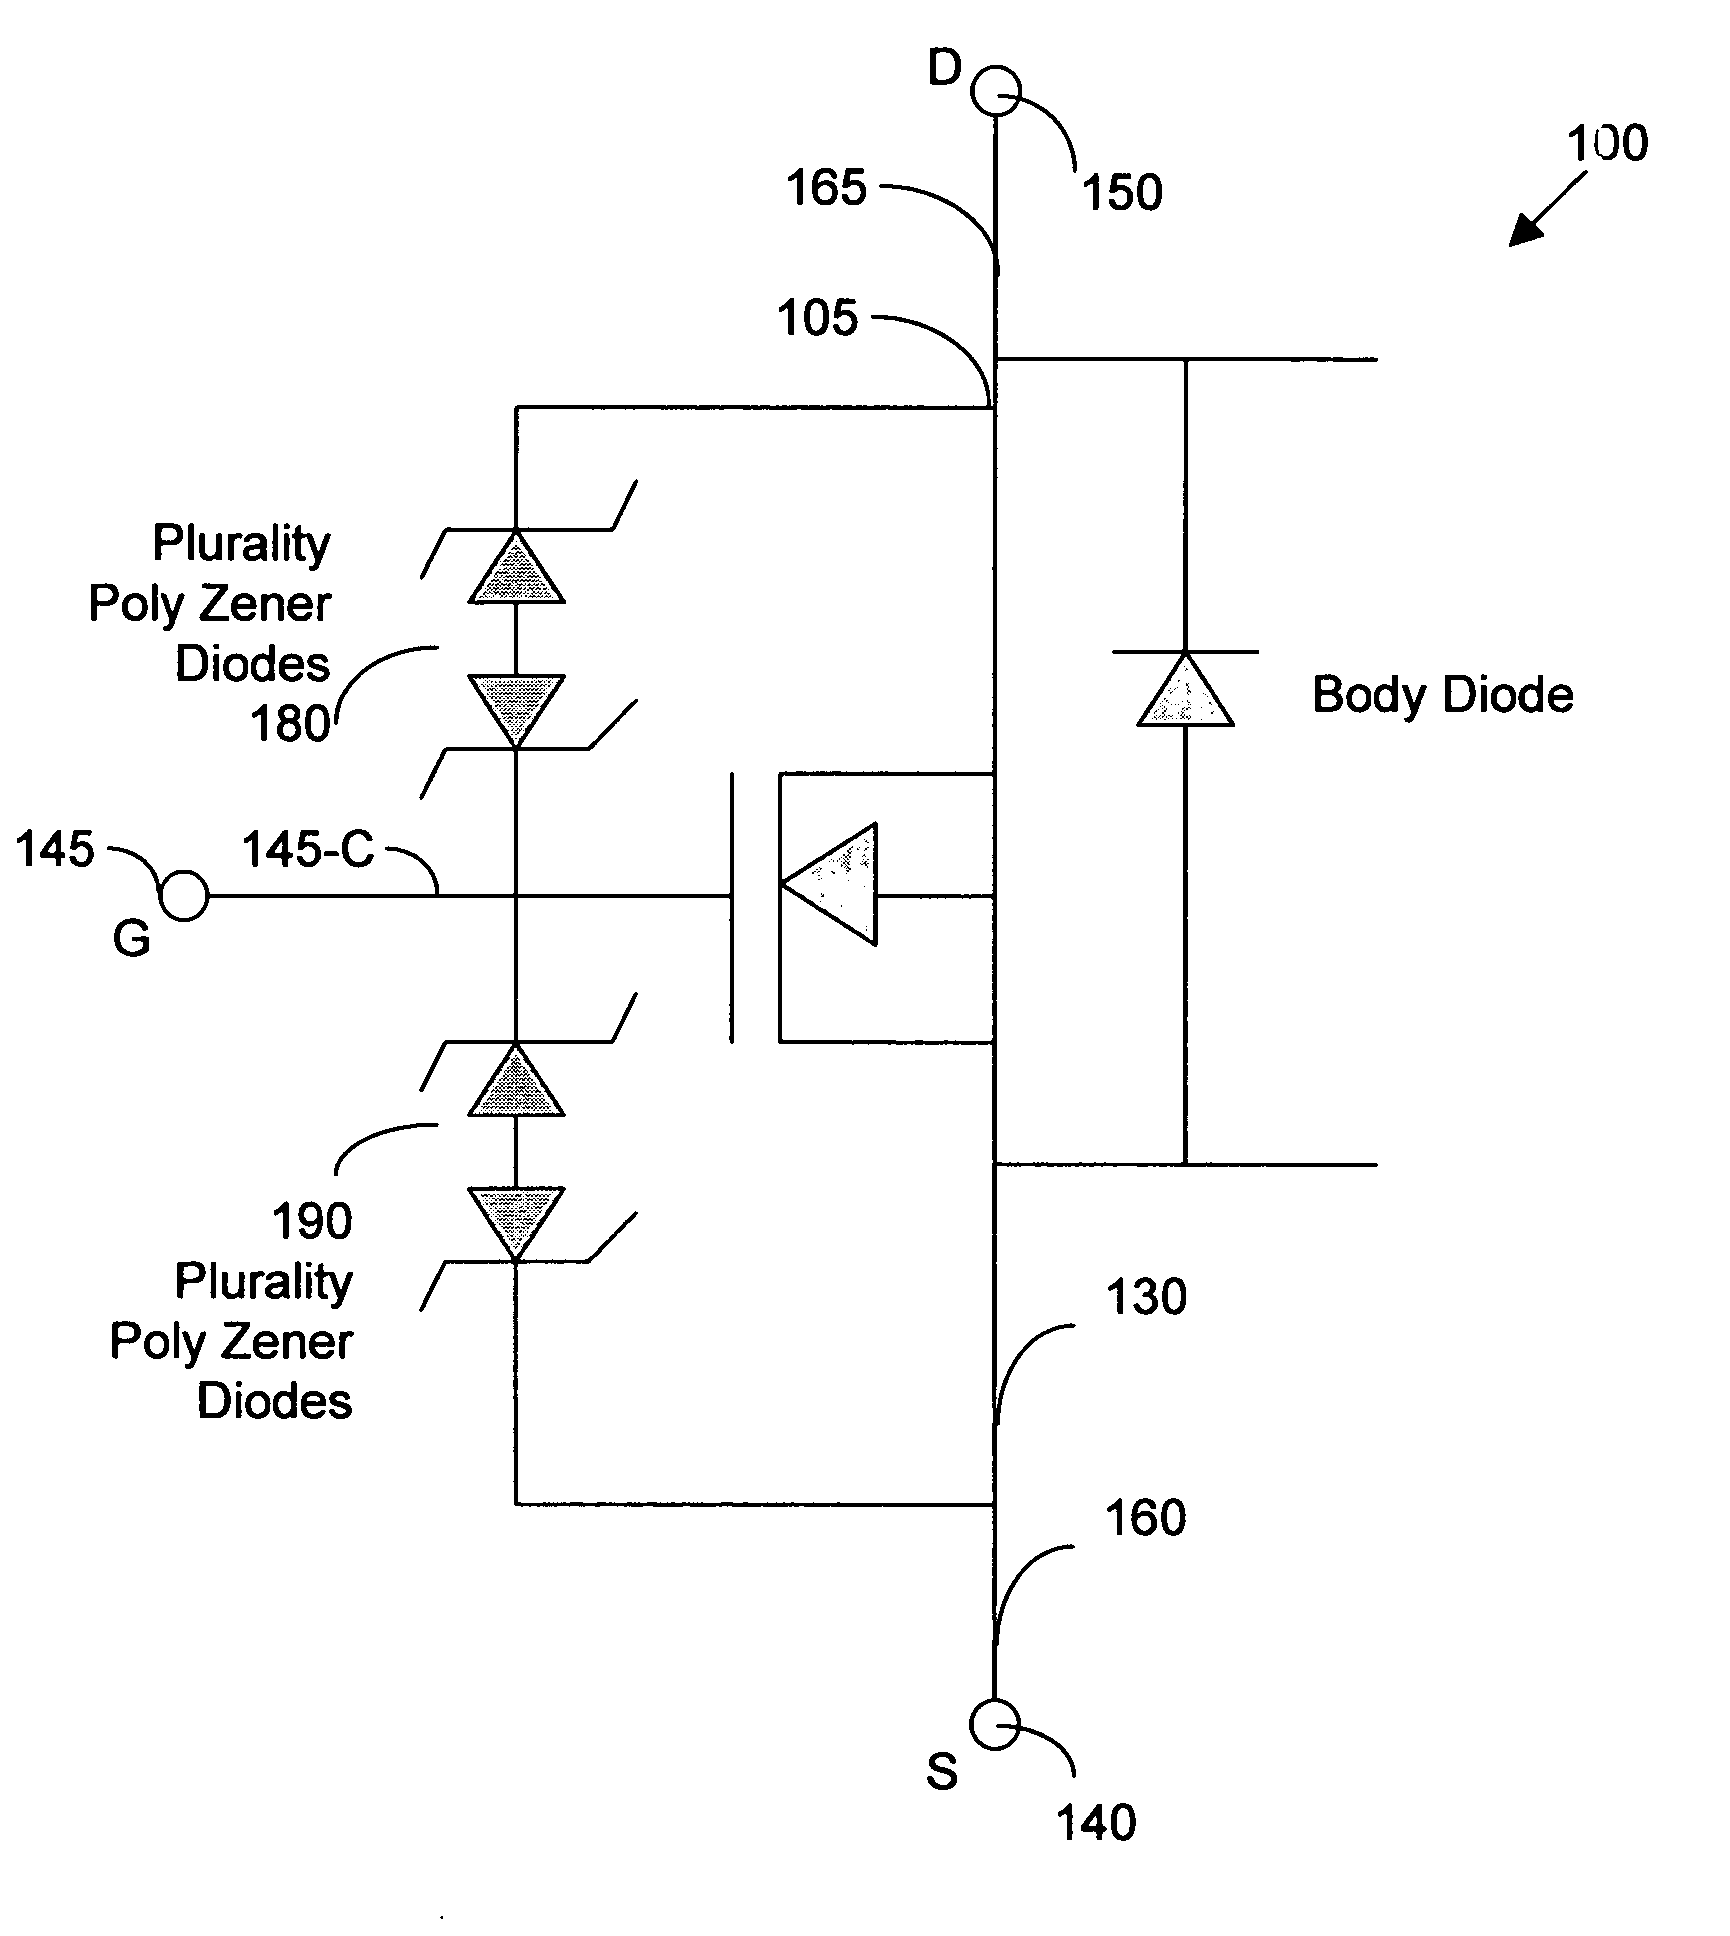 Trenched MOSFETs with improved gate-drain (GD) clamp diodes